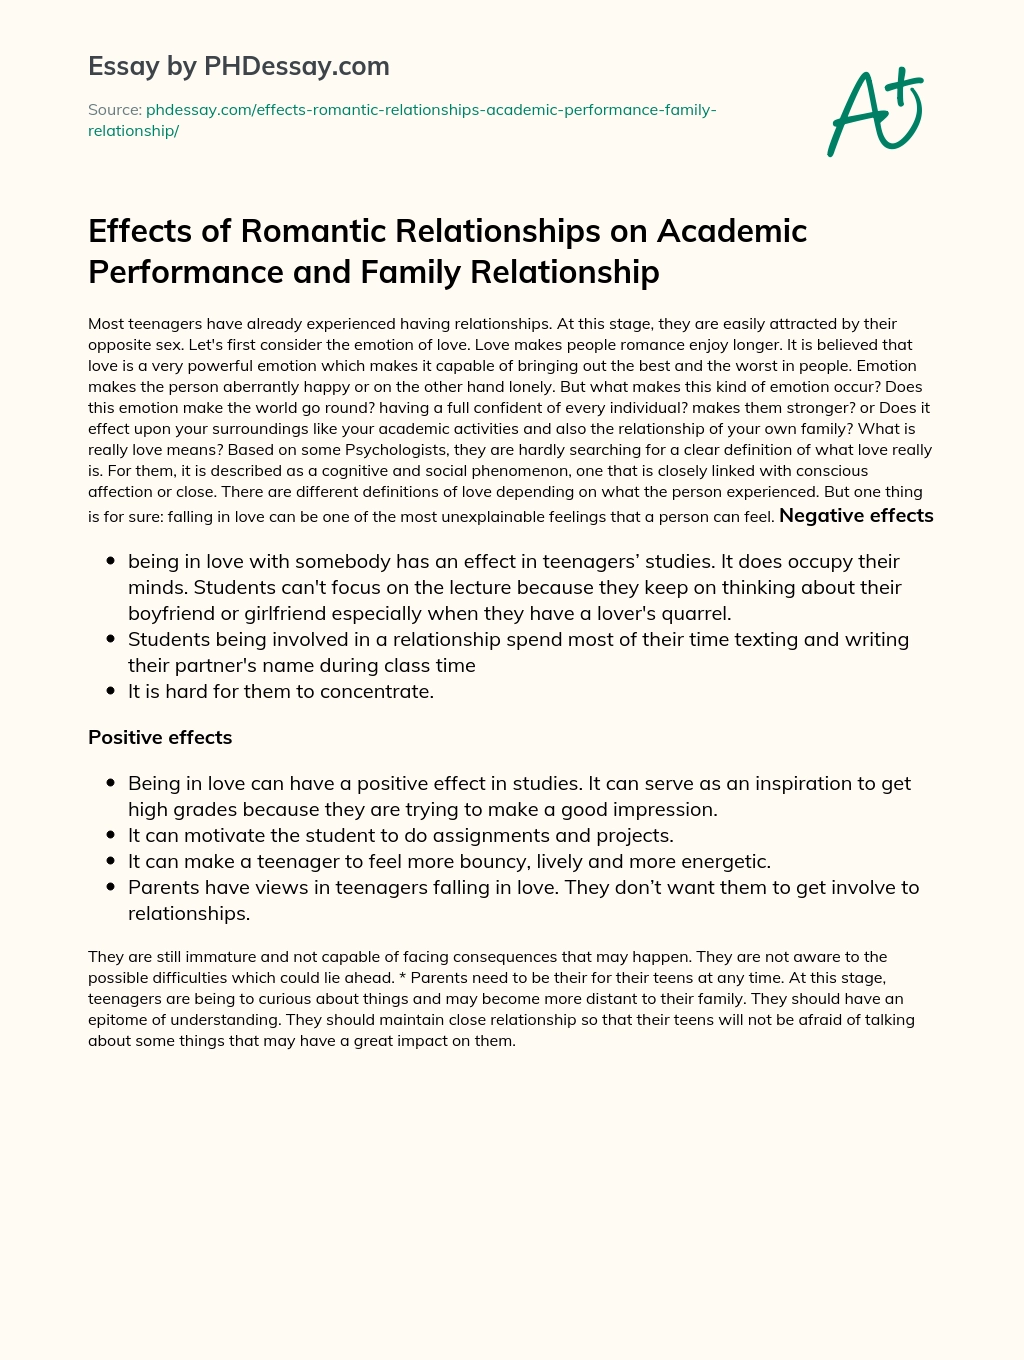 Effects of Romantic Relationships on Academic Performance and Family Relationship essay